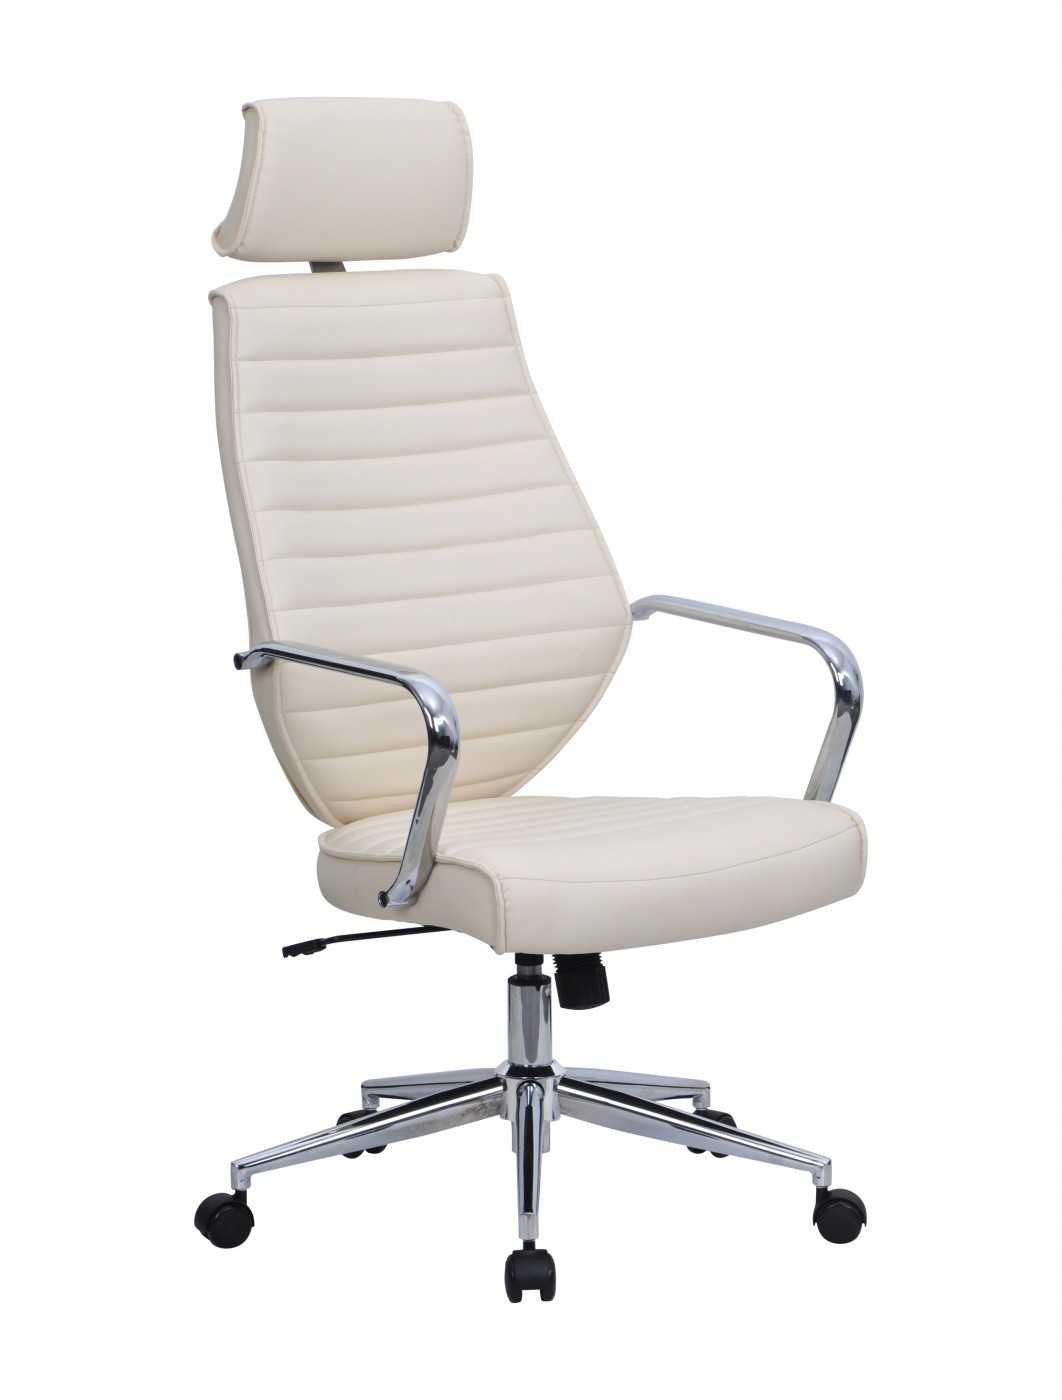 Faux Leather Atlas Executive Chair Bcp, Cream Office Chair Faux Leather